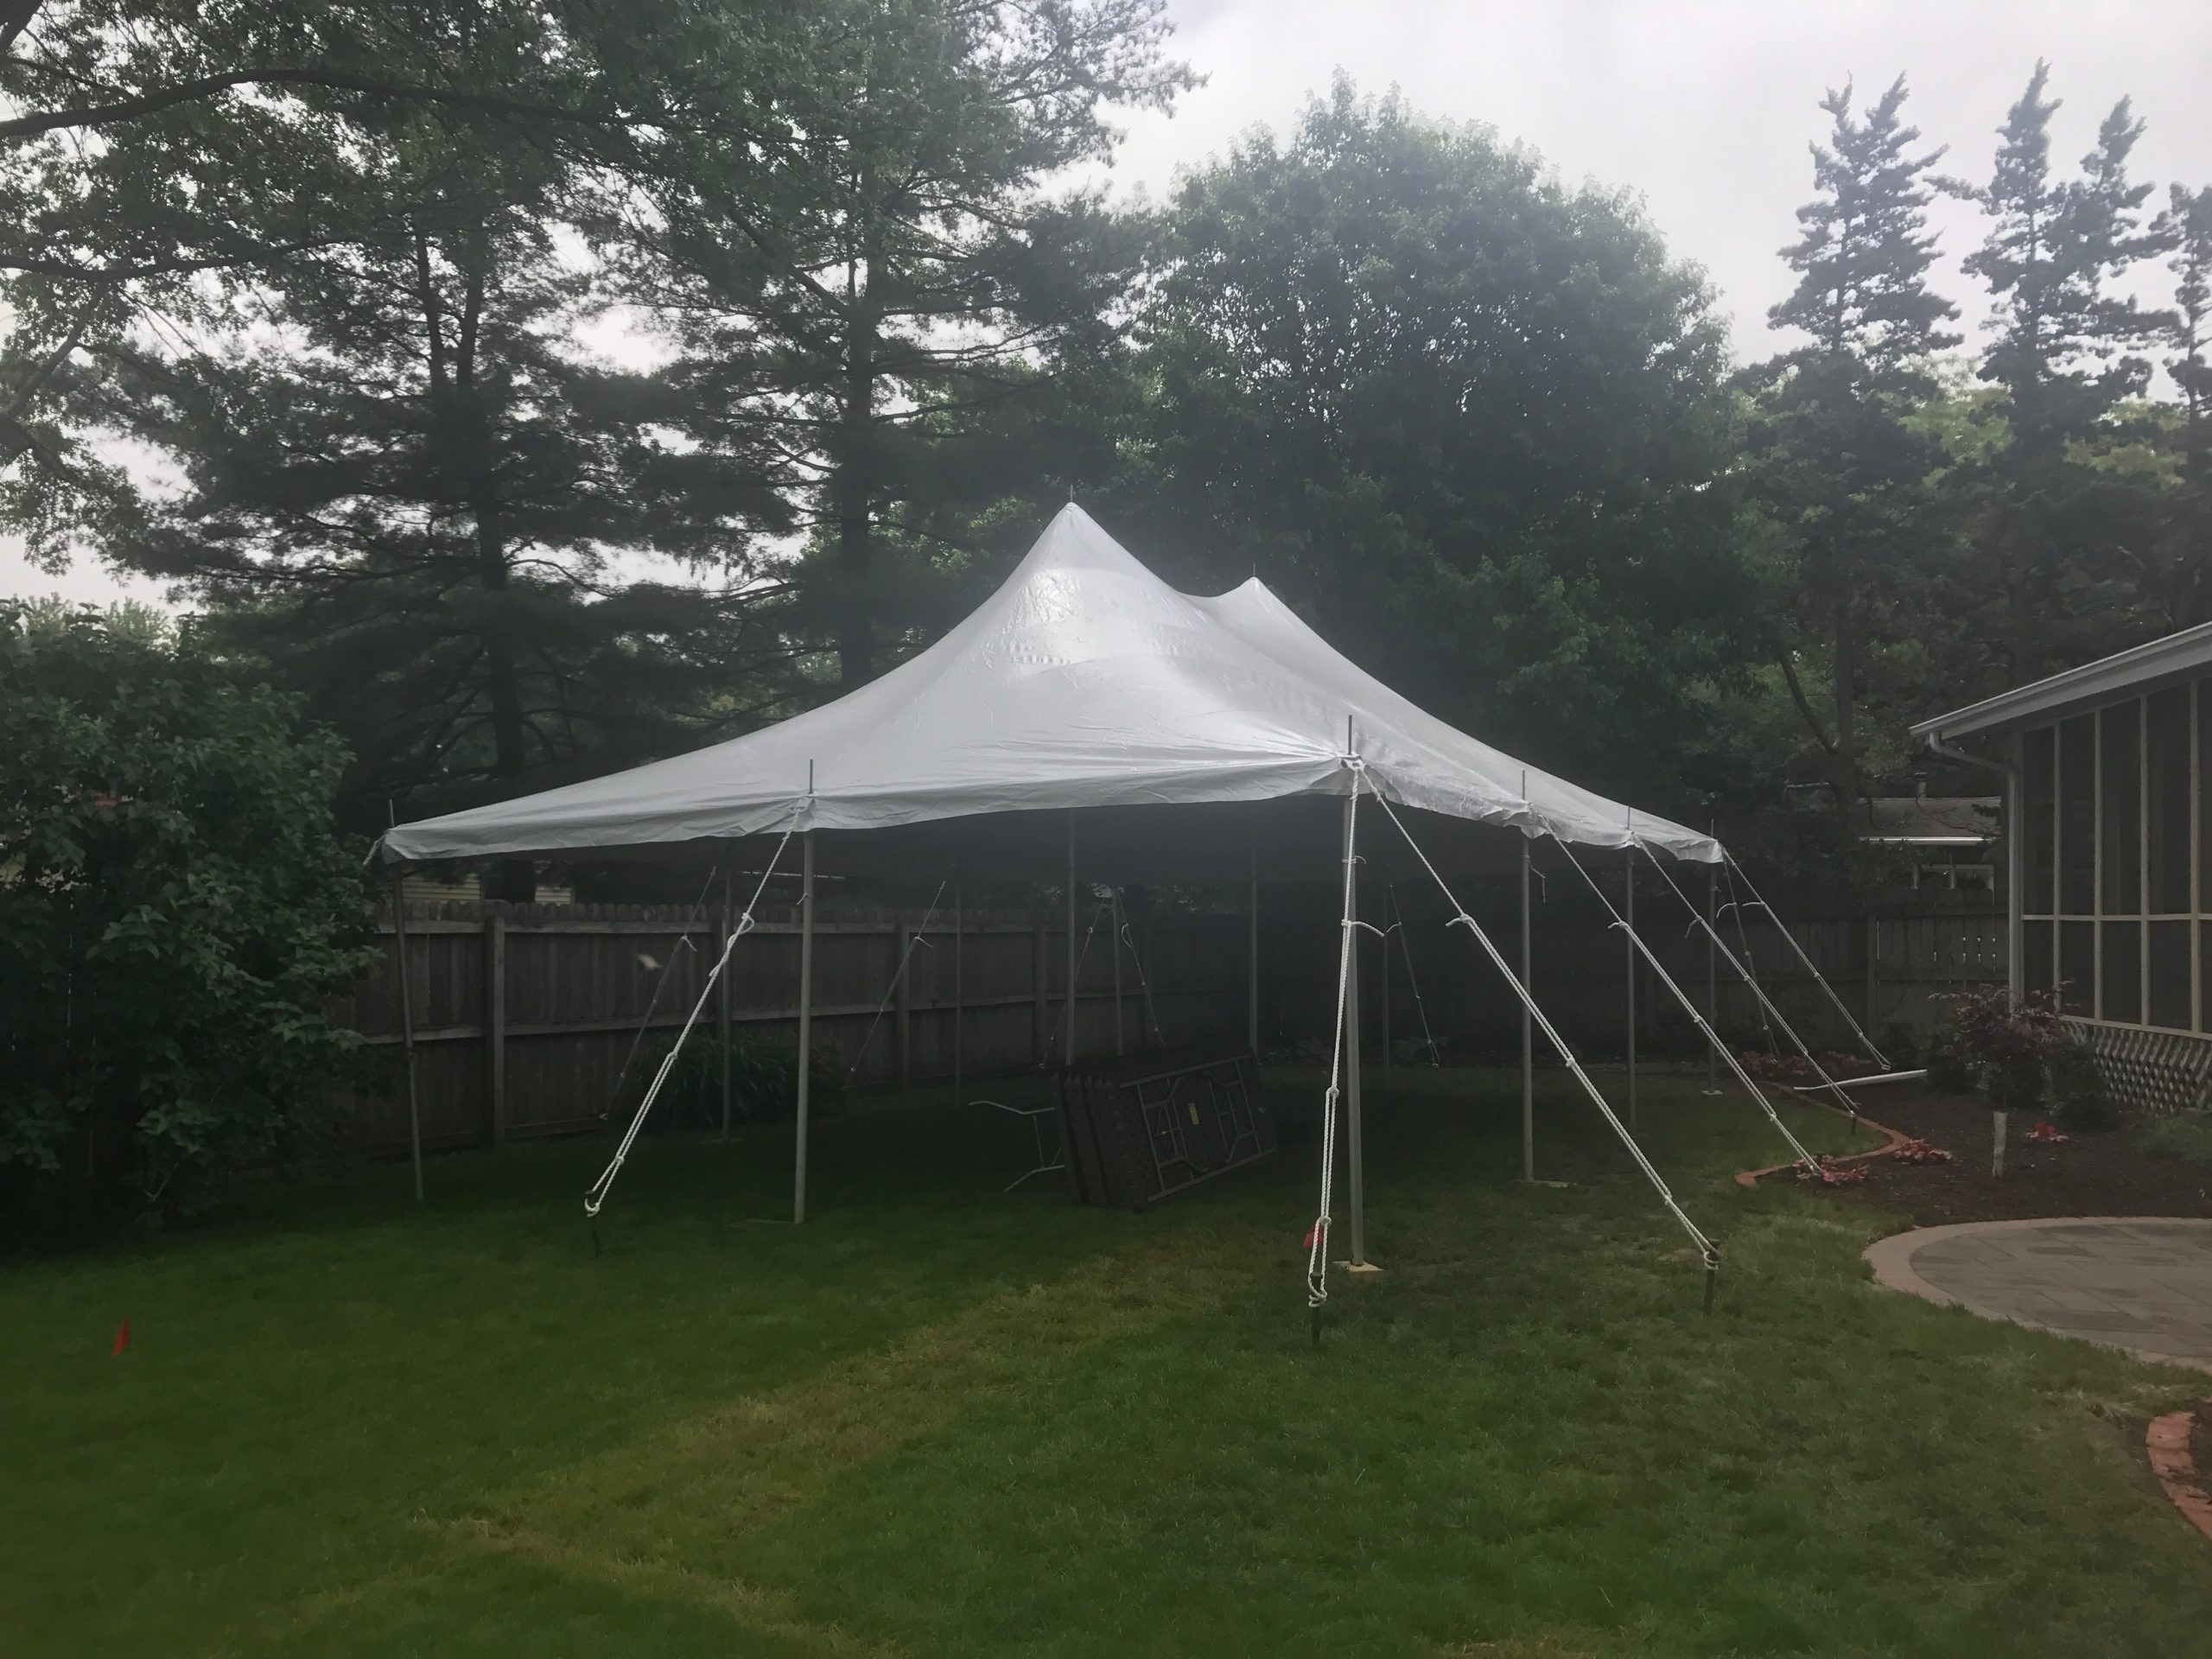 Backyard Graduation Party with 20' x 30' rope and pole tent